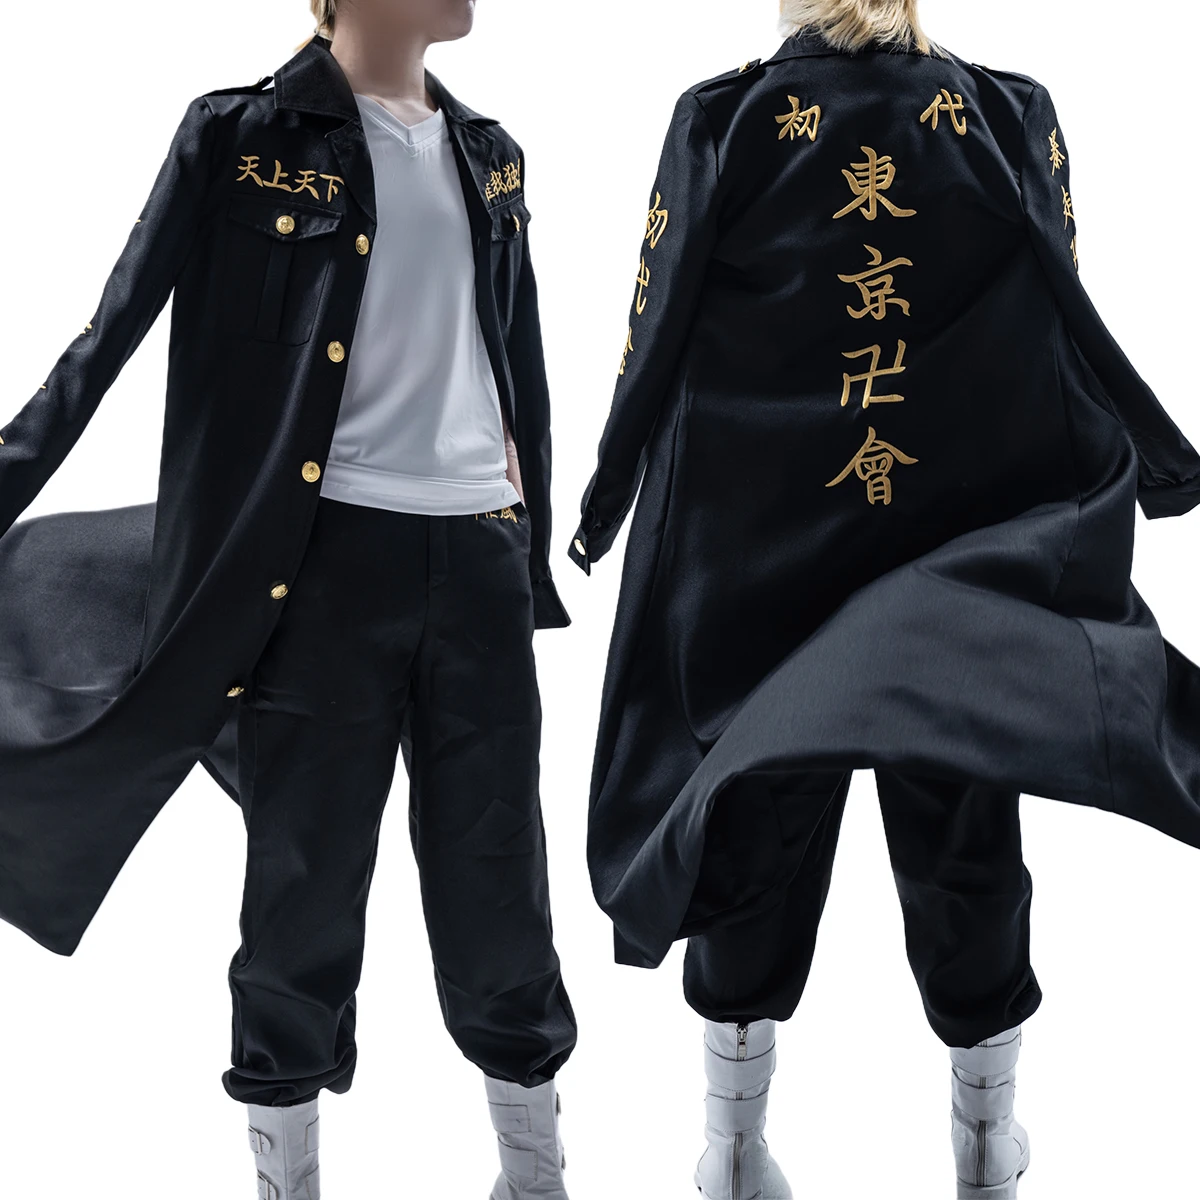 

Tokyo Revengers Anime Cosplay Costume Manjiro Sano Mikey Manji Embroided First Generation Special Attack Uniform Coat